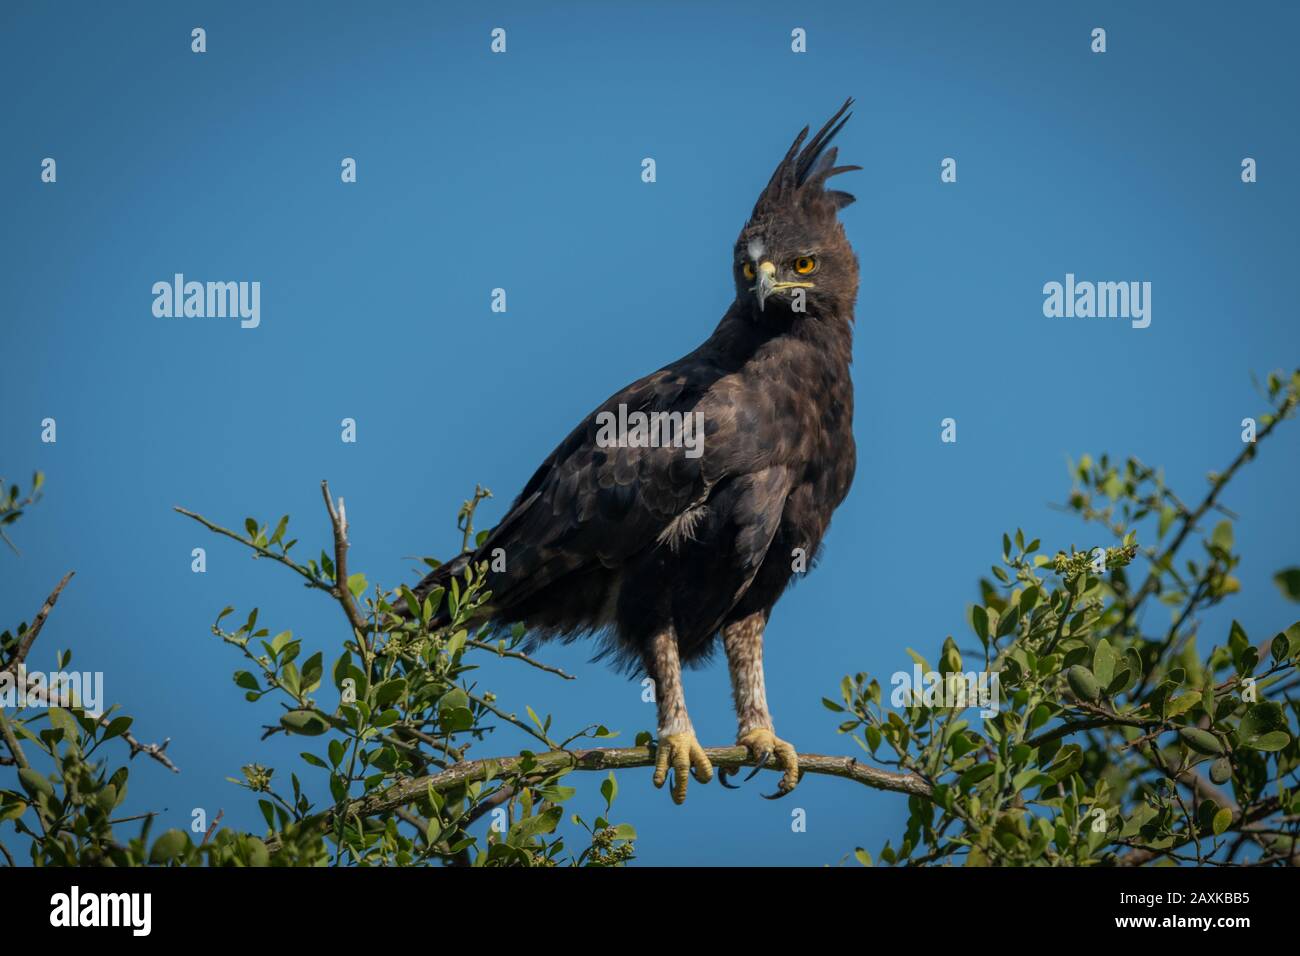 Long-crested eagle perched on branch looking down Stock Photo